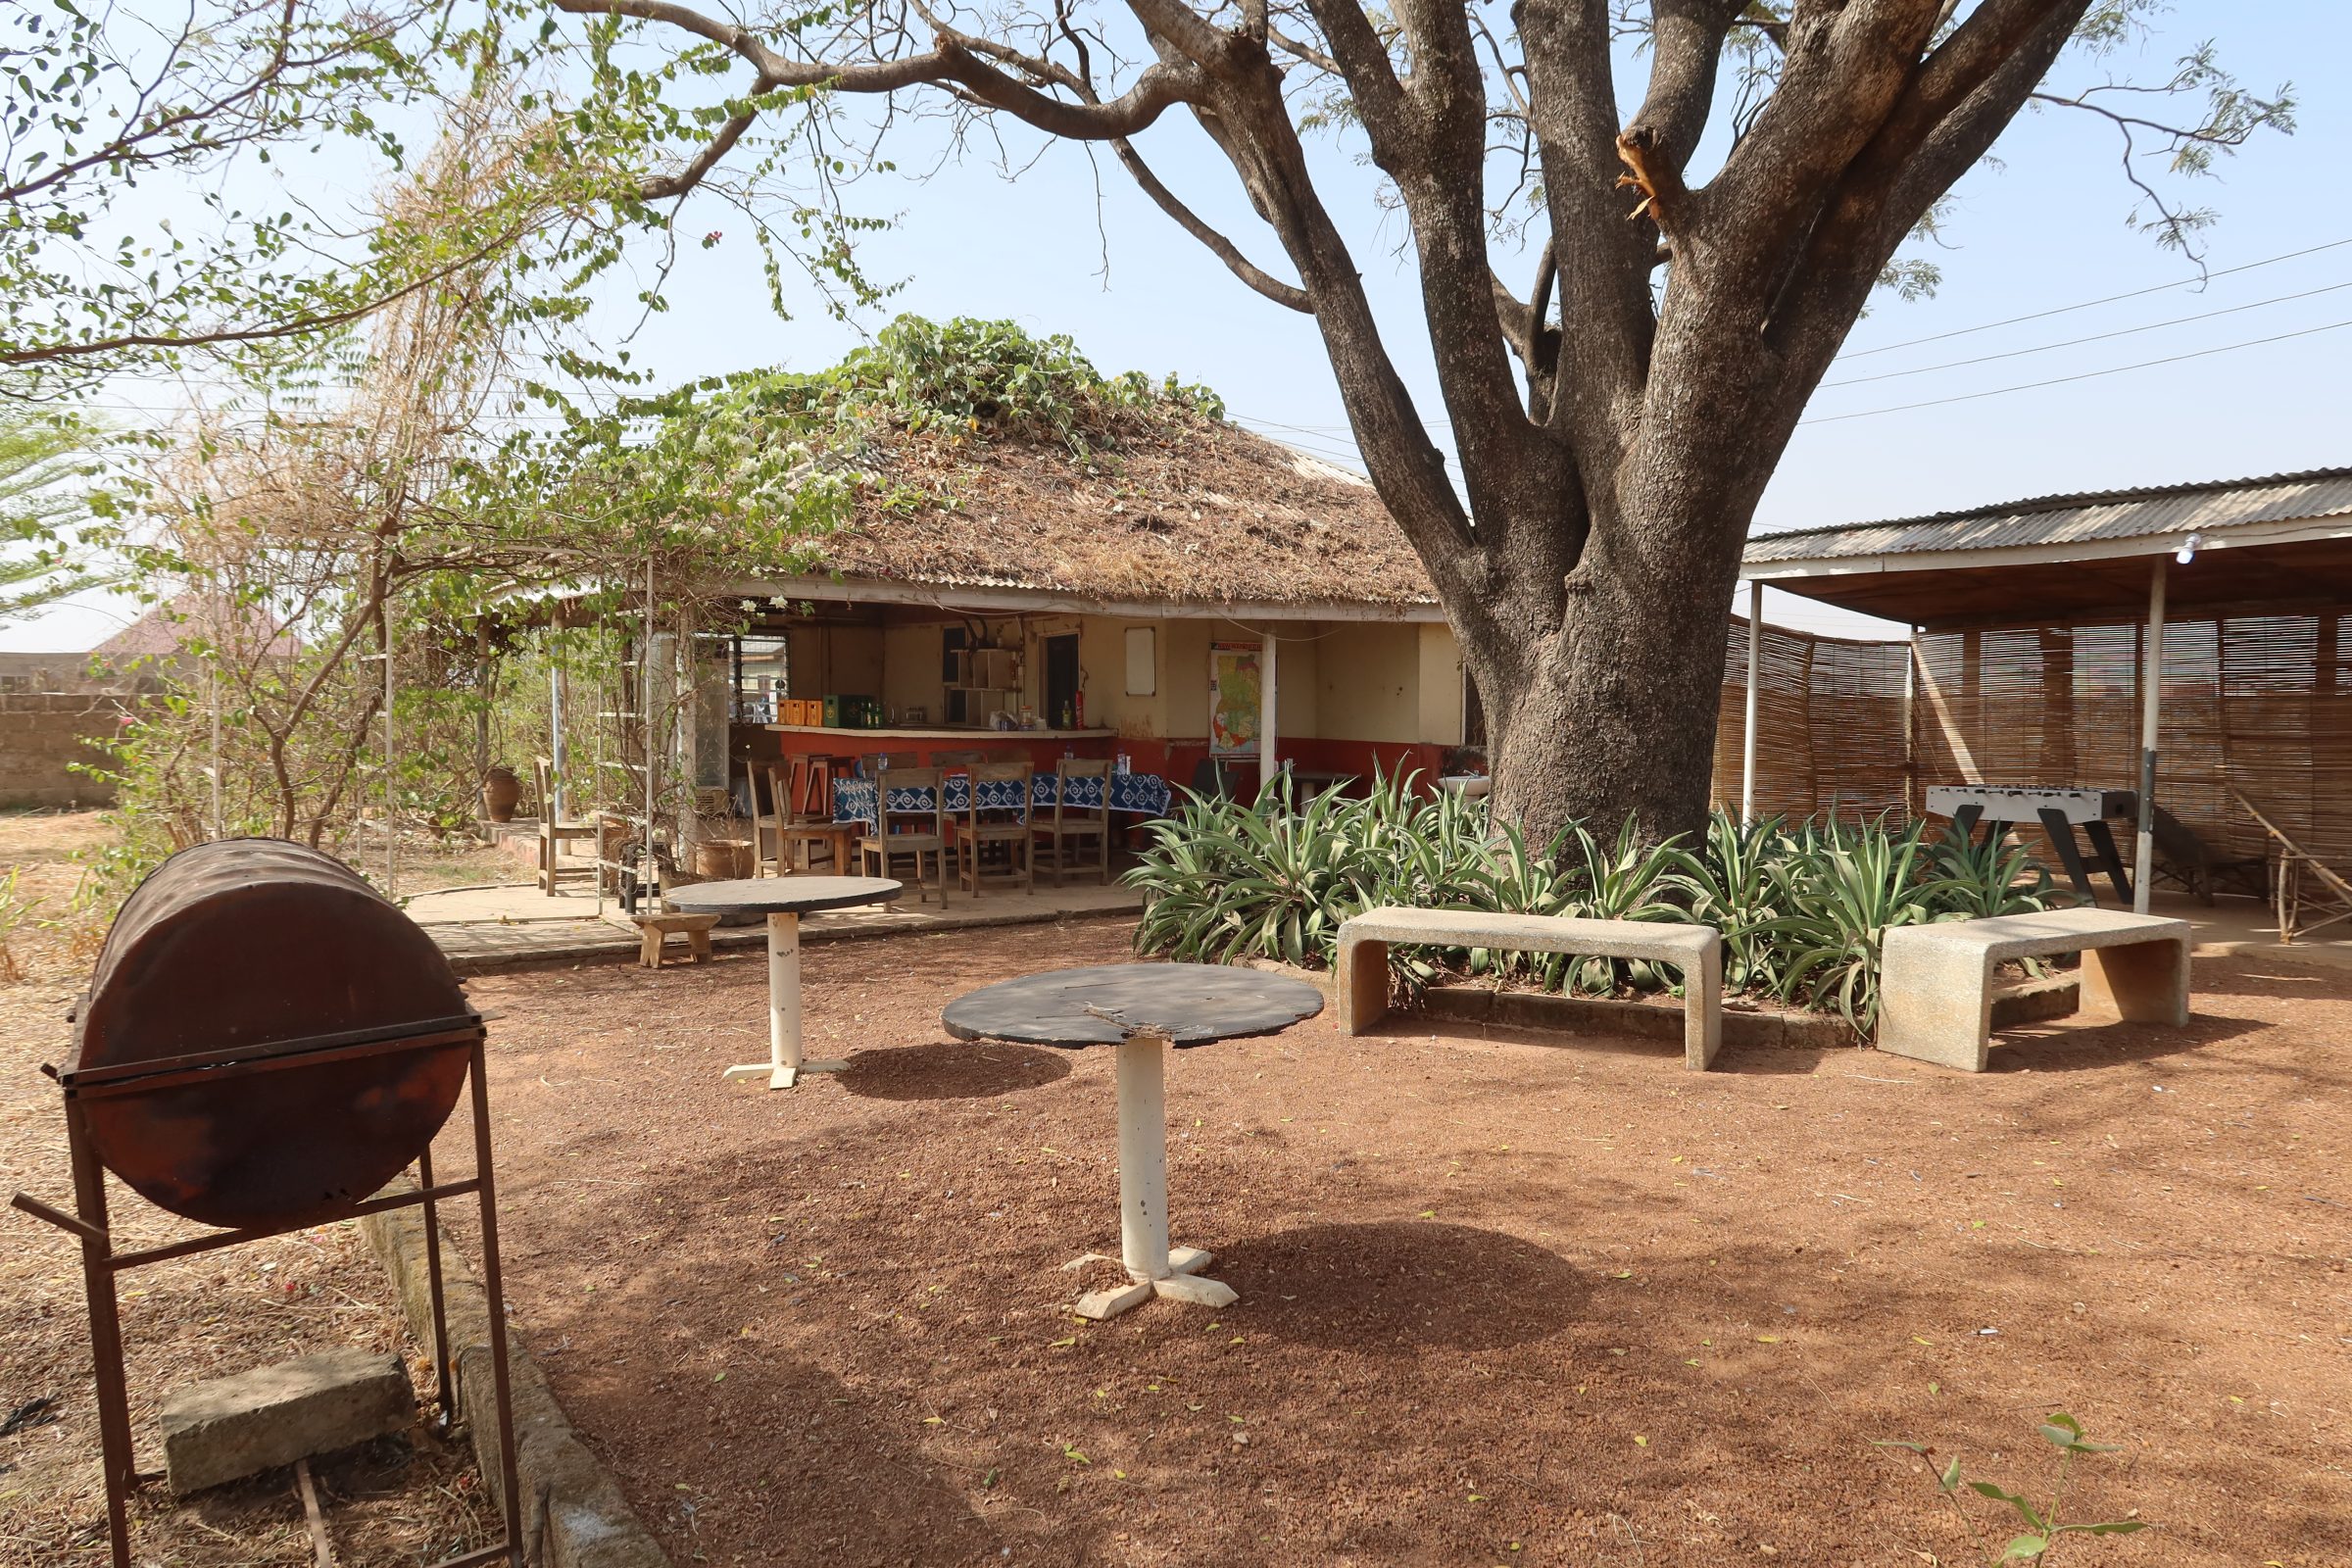 Another part of the Dawadawa lodge in Tamale, Ghana.